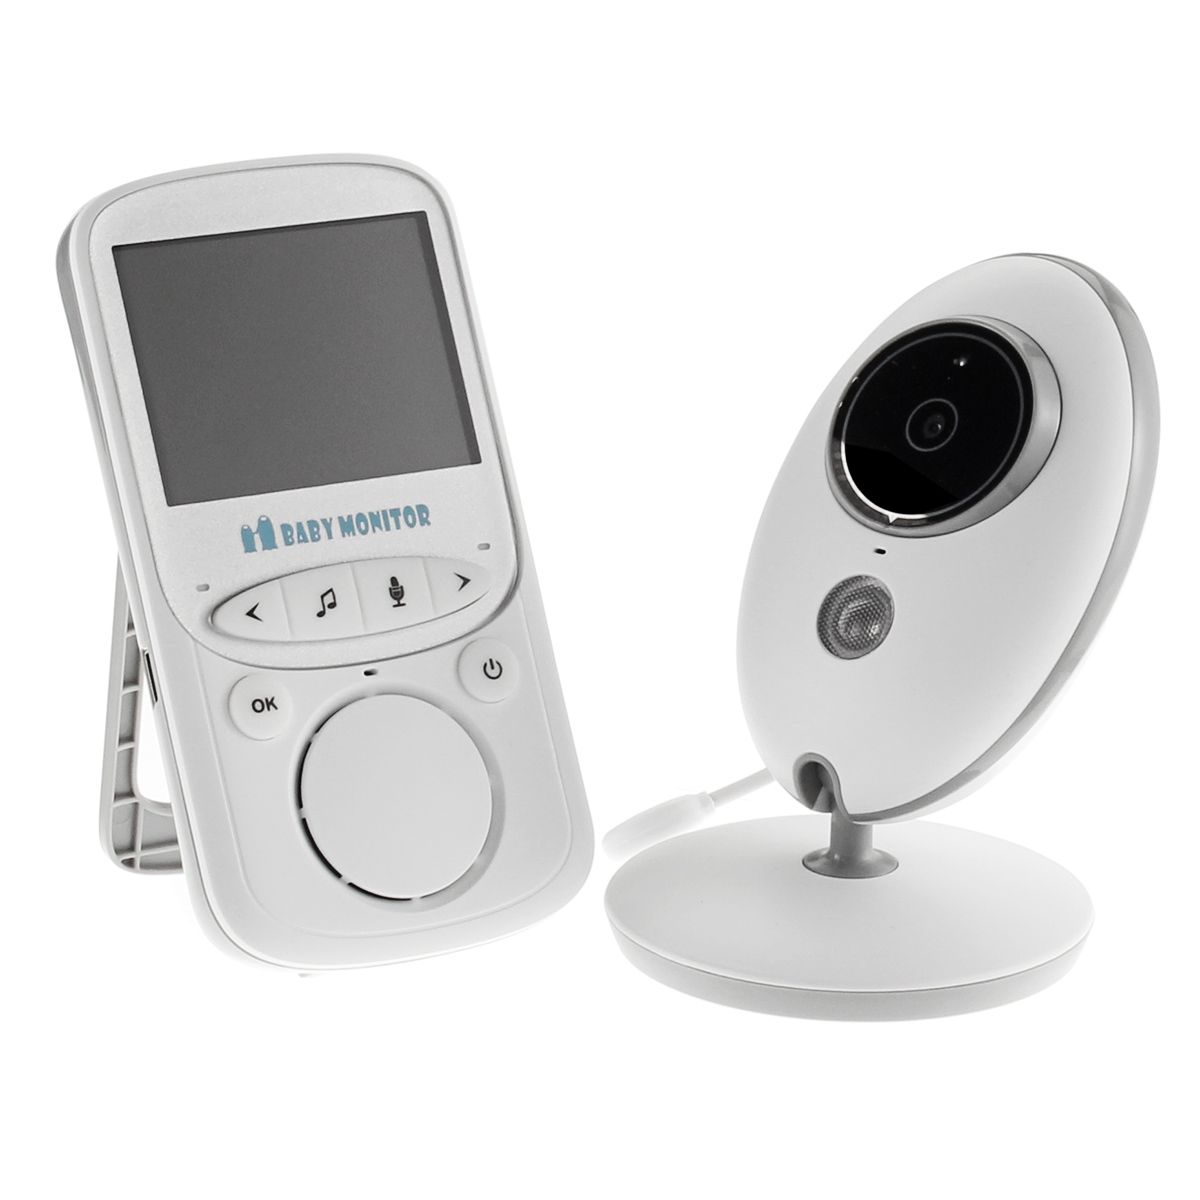 Wireless-Baby-Monitors-24GHz-Color-LCD-Audio-Talk-Night-Vision-Video-Temperature-Music-Player-1275229